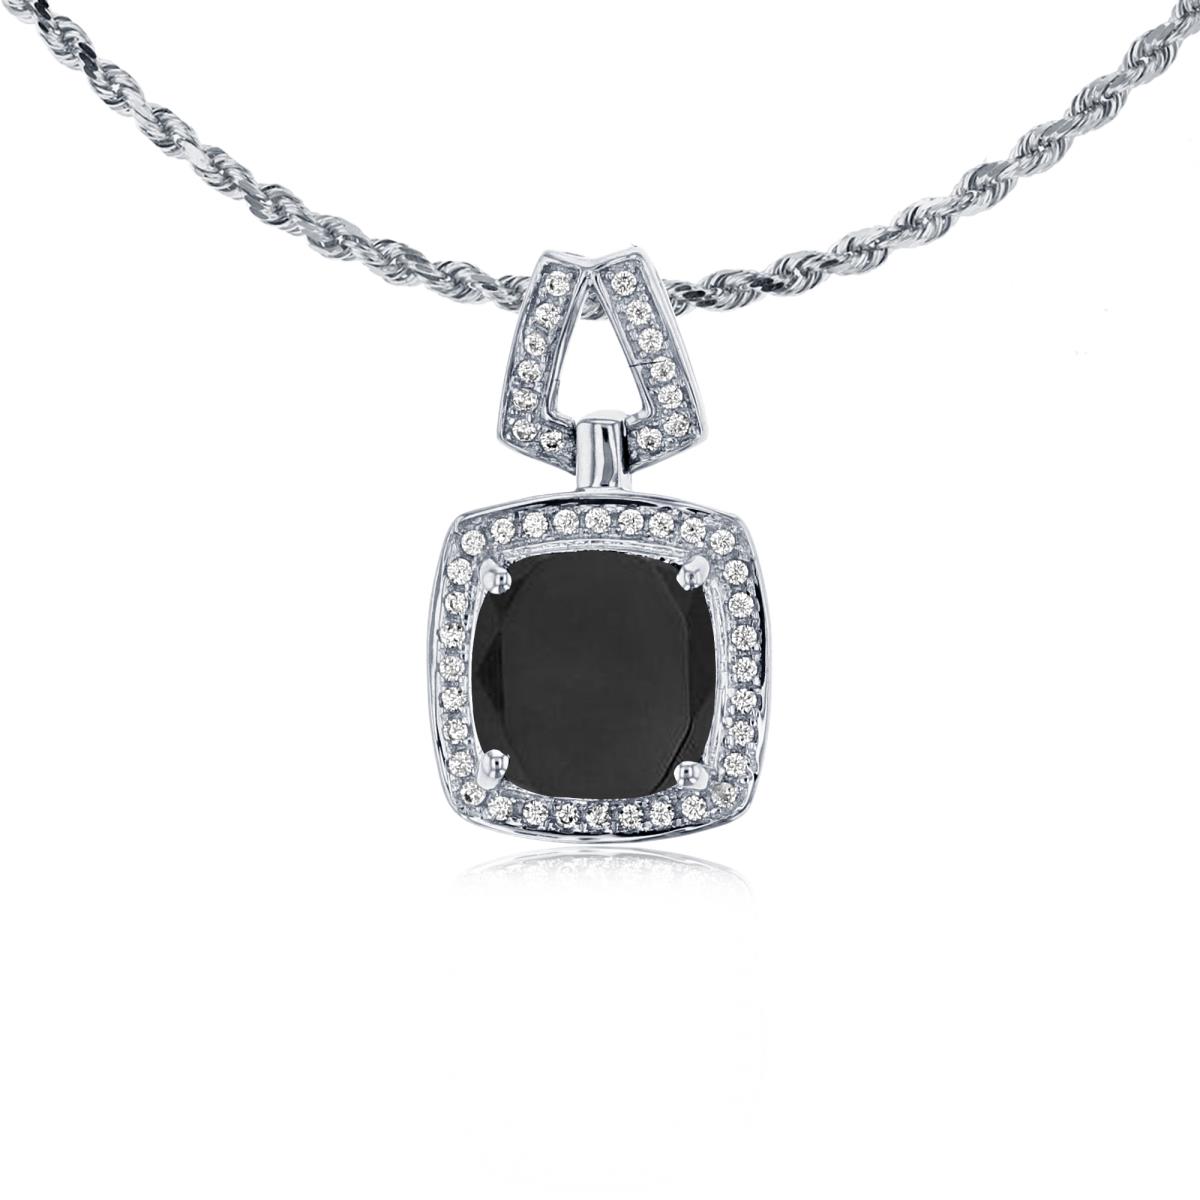 10K White Gold 7mm Cushion Onyx & 0.10 CTTW Diamond Halo 18" Rope Chain Necklace